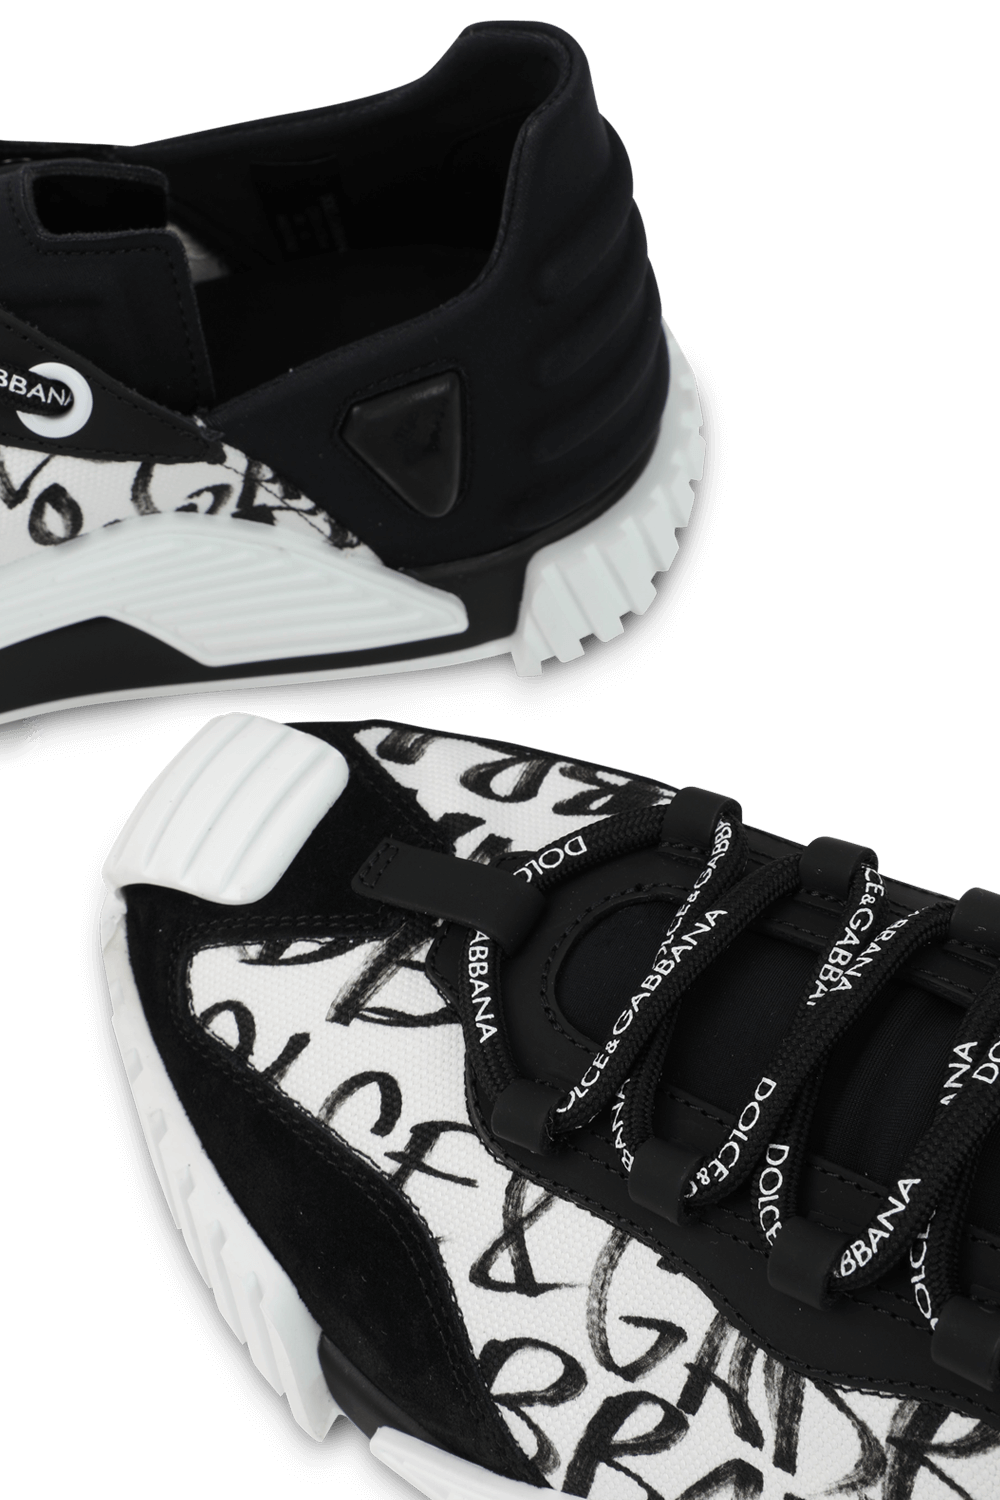 Mixed Material NS1 Sneakers in Black and White DOLCE & GABBANA